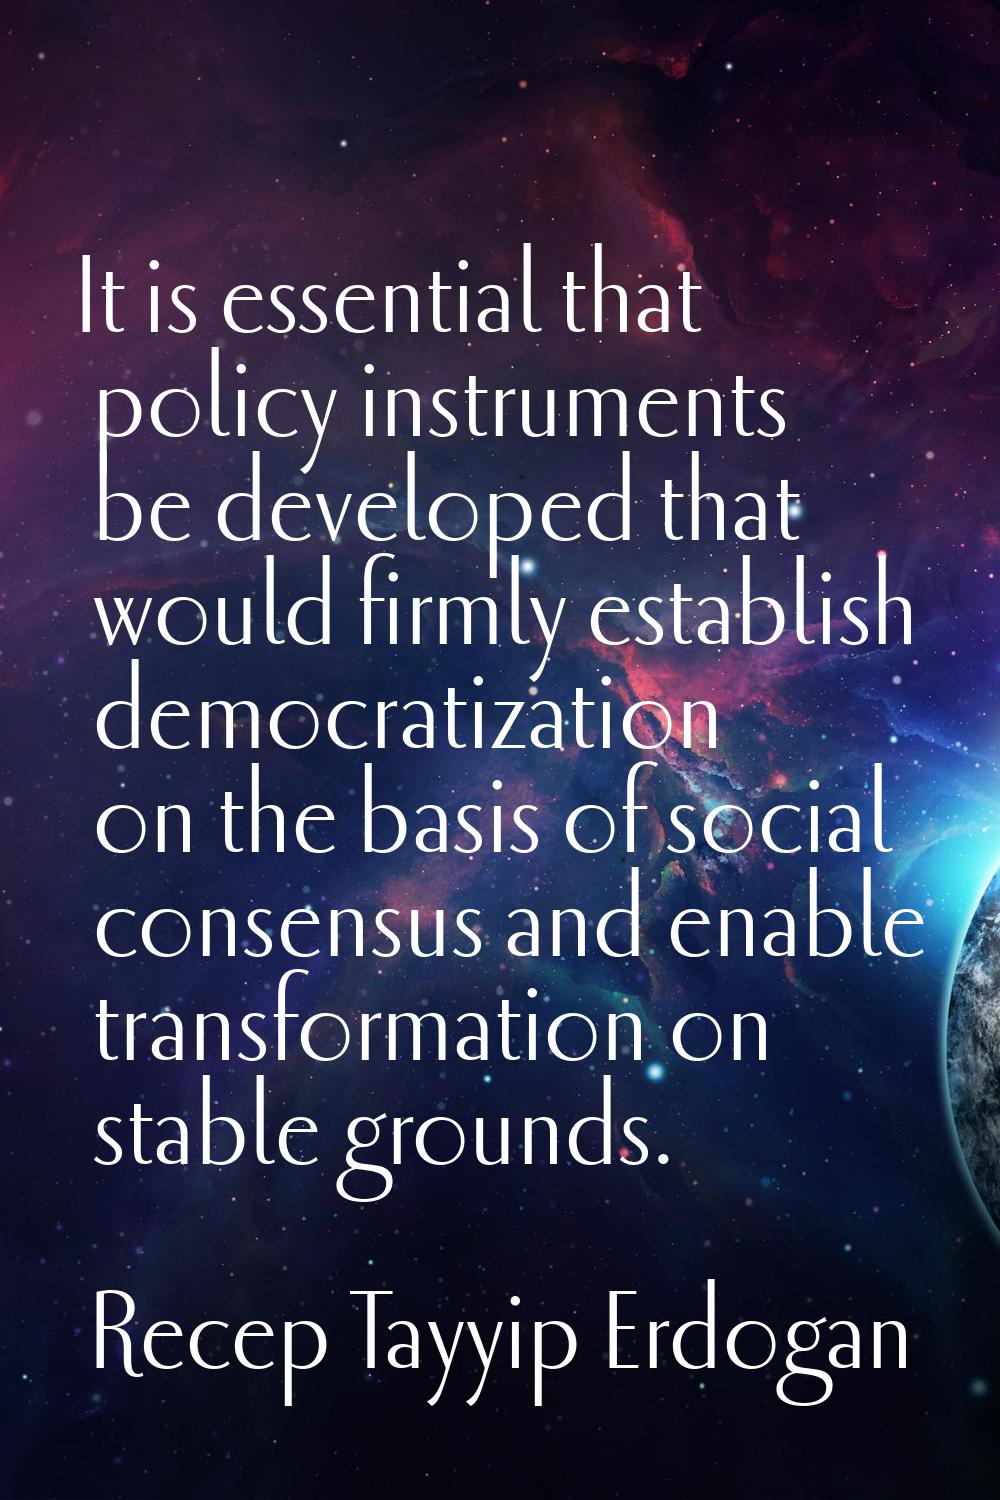 It is essential that policy instruments be developed that would firmly establish democratization on